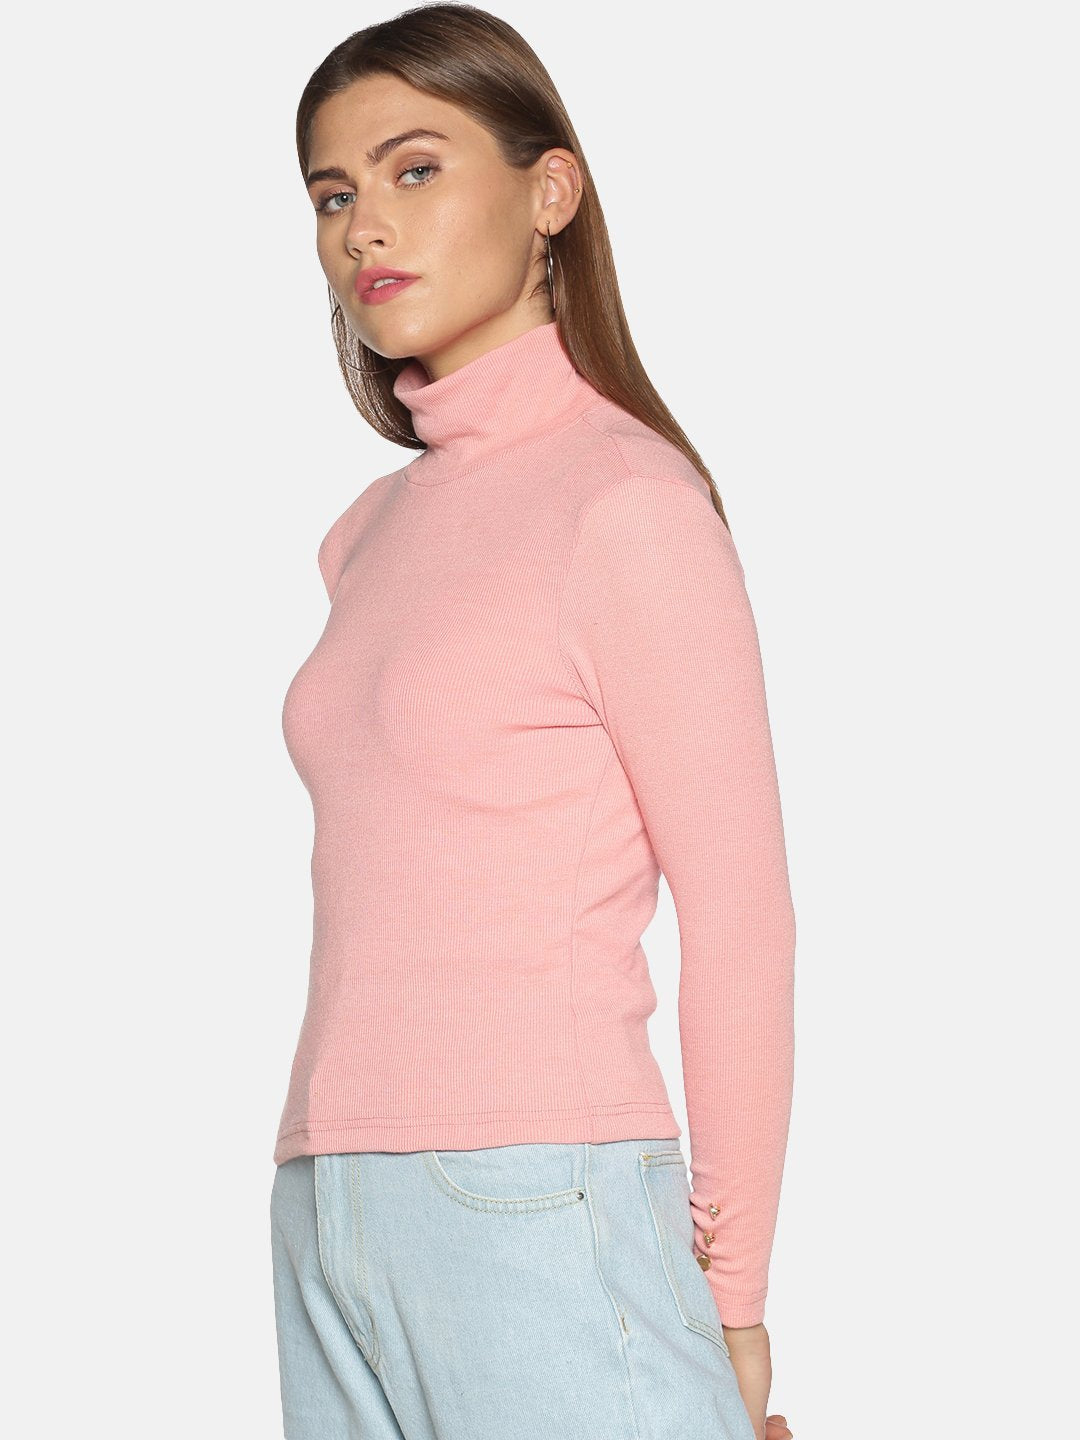 IS.U Pink Long Sleeve Knitted Top